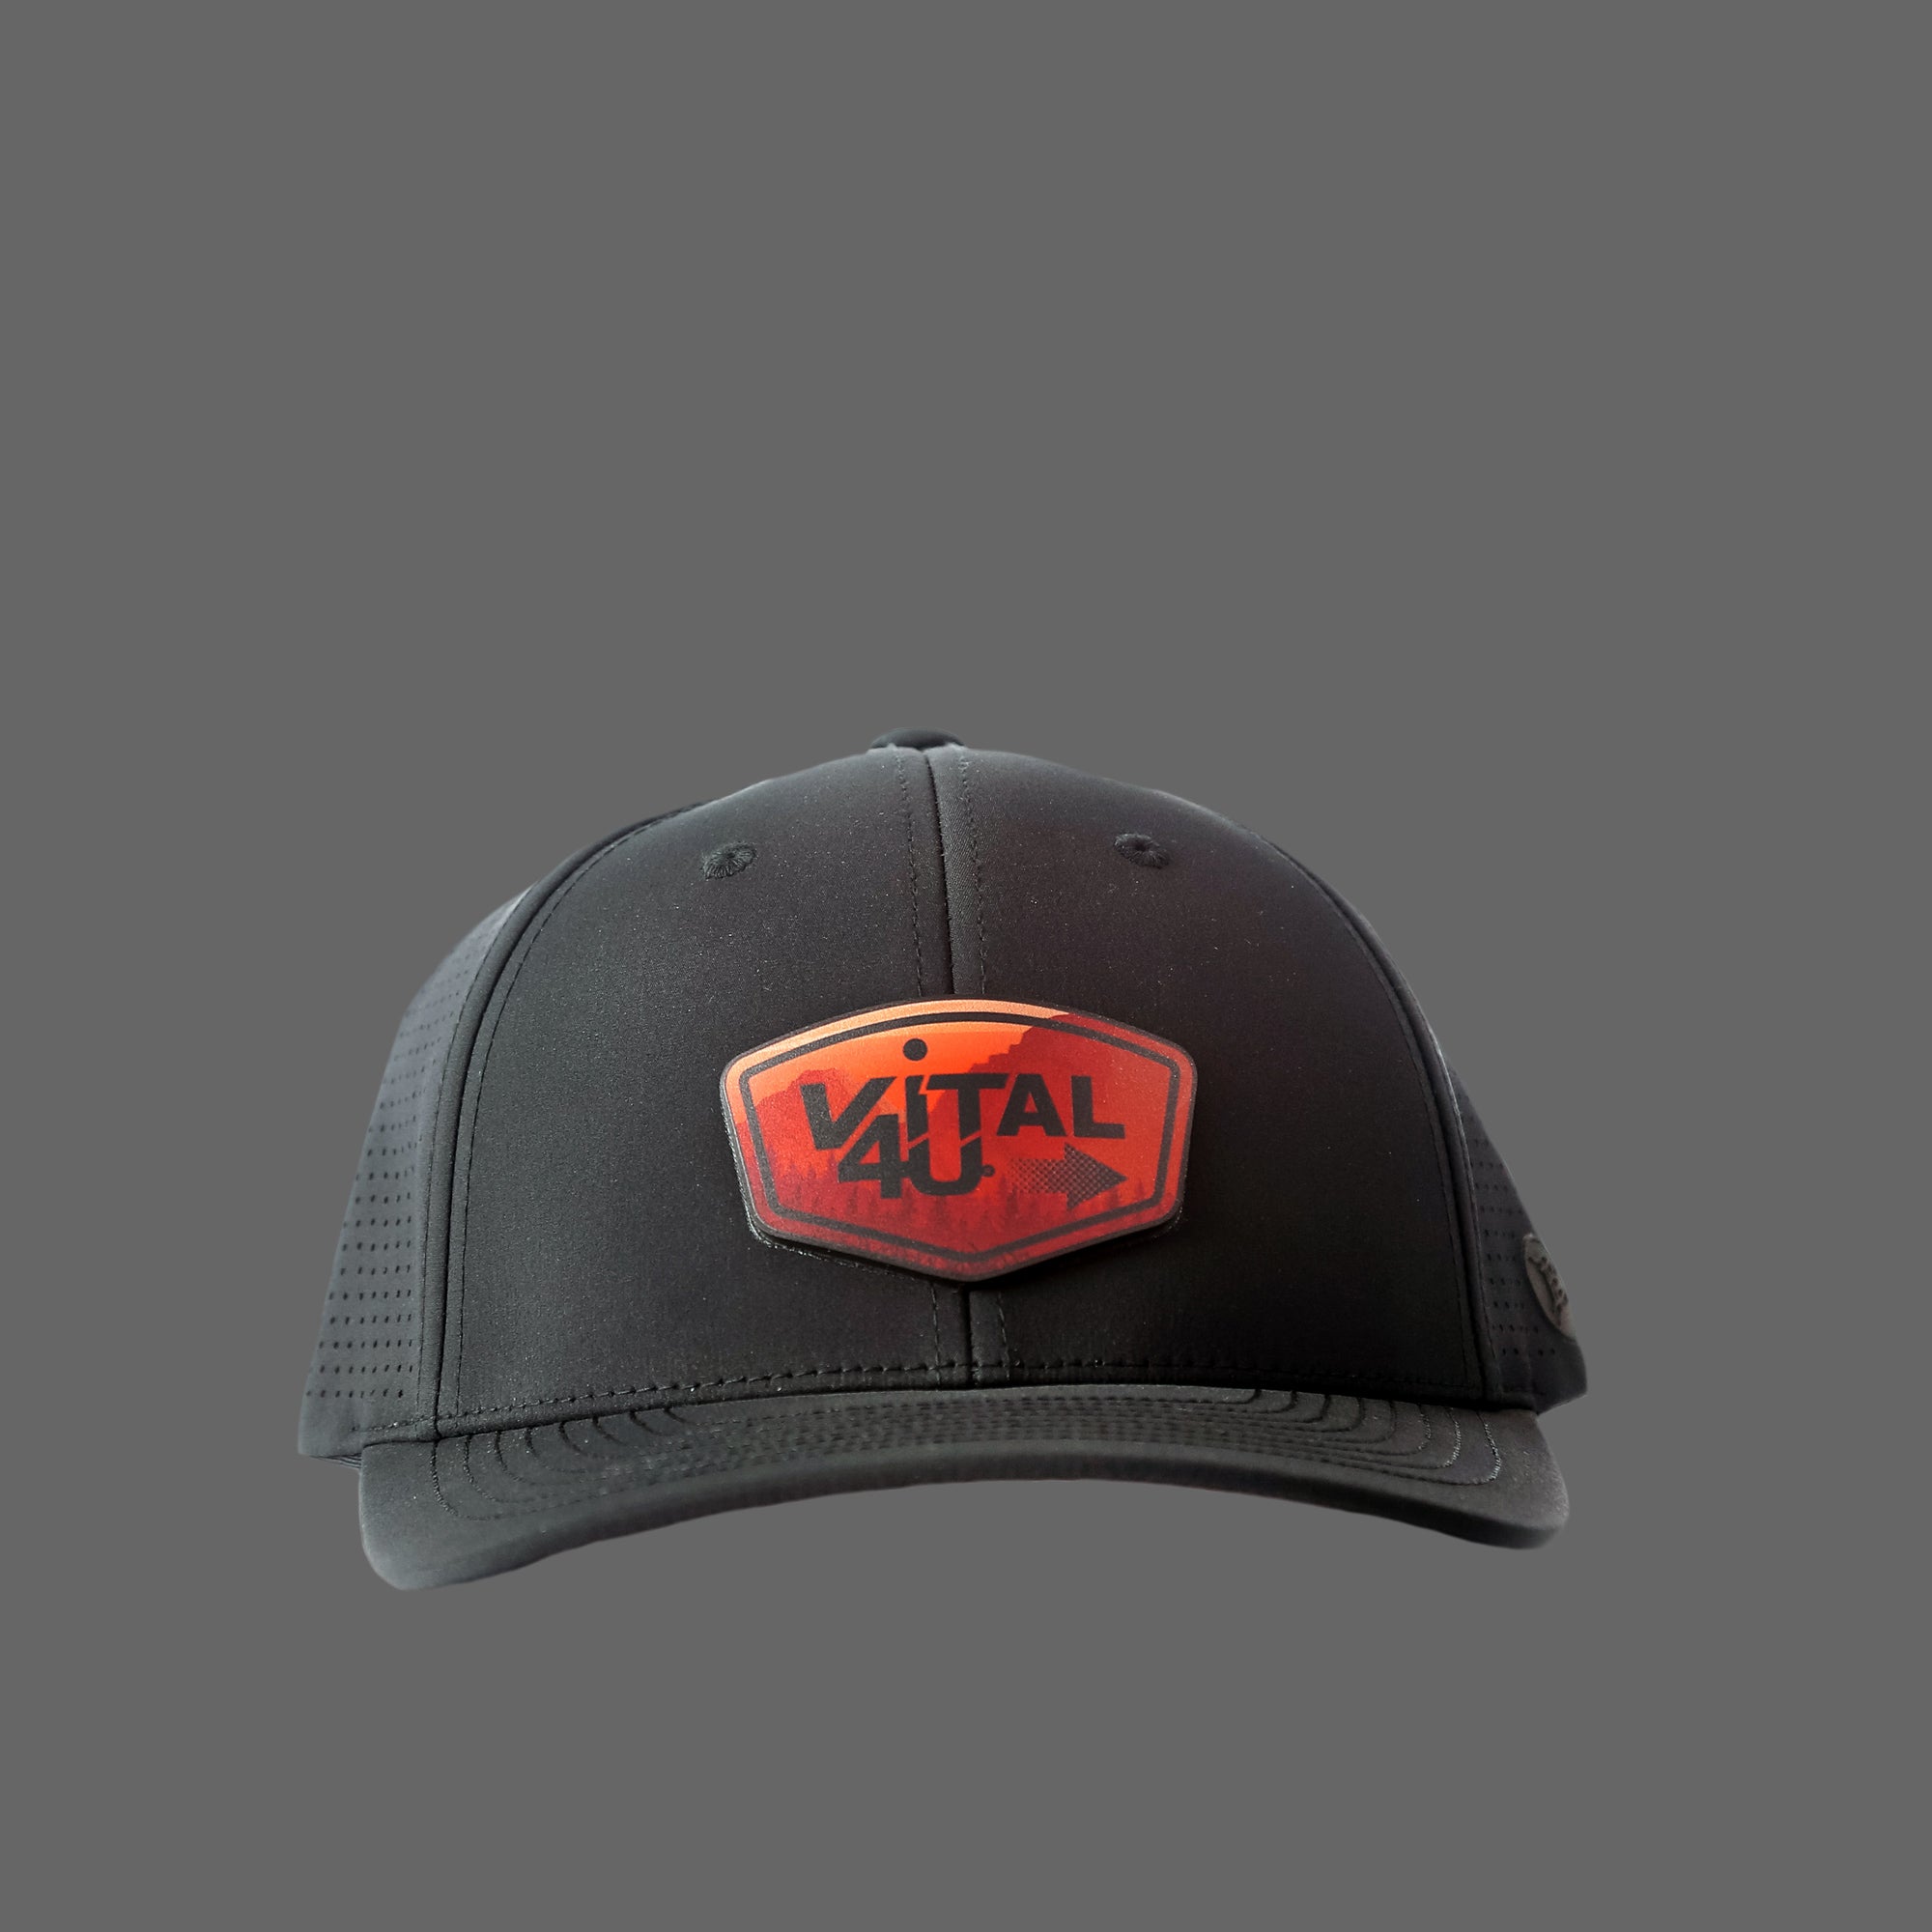 Elite Hydro Hat - Curved